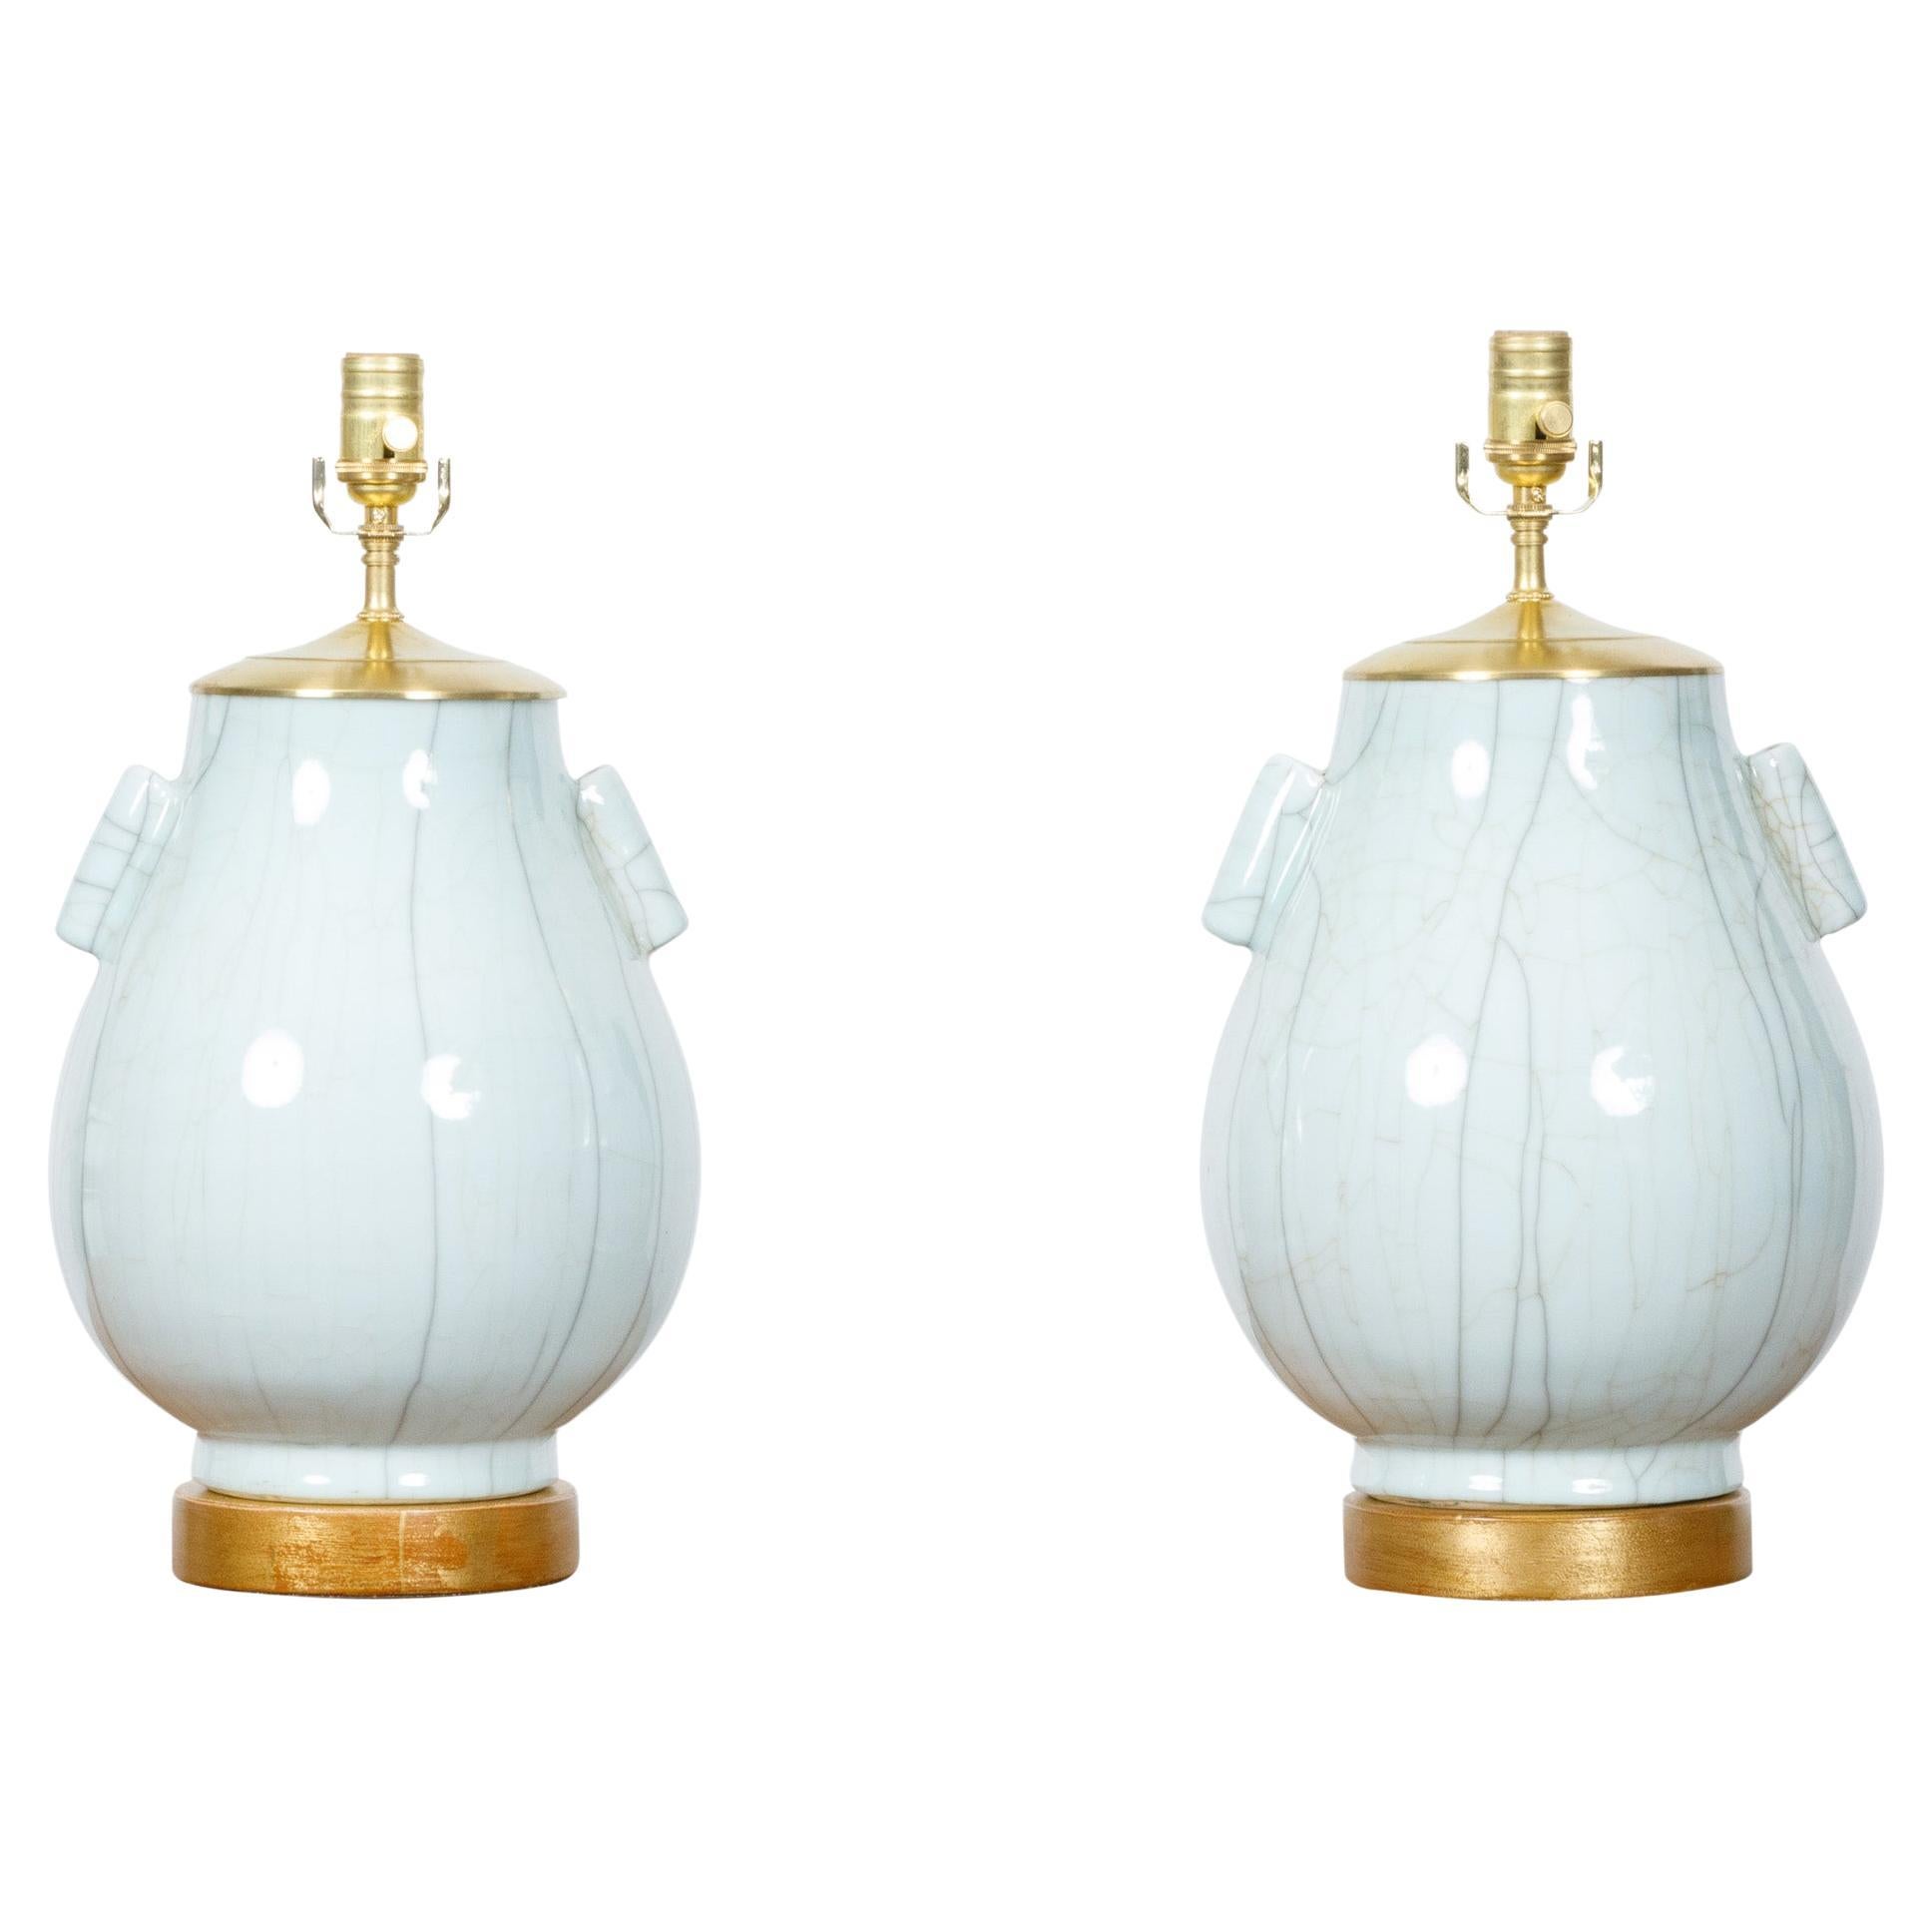 Pair of White Porcelain Tulip Shaped Vases with Crackle Finish Made into Lamps For Sale